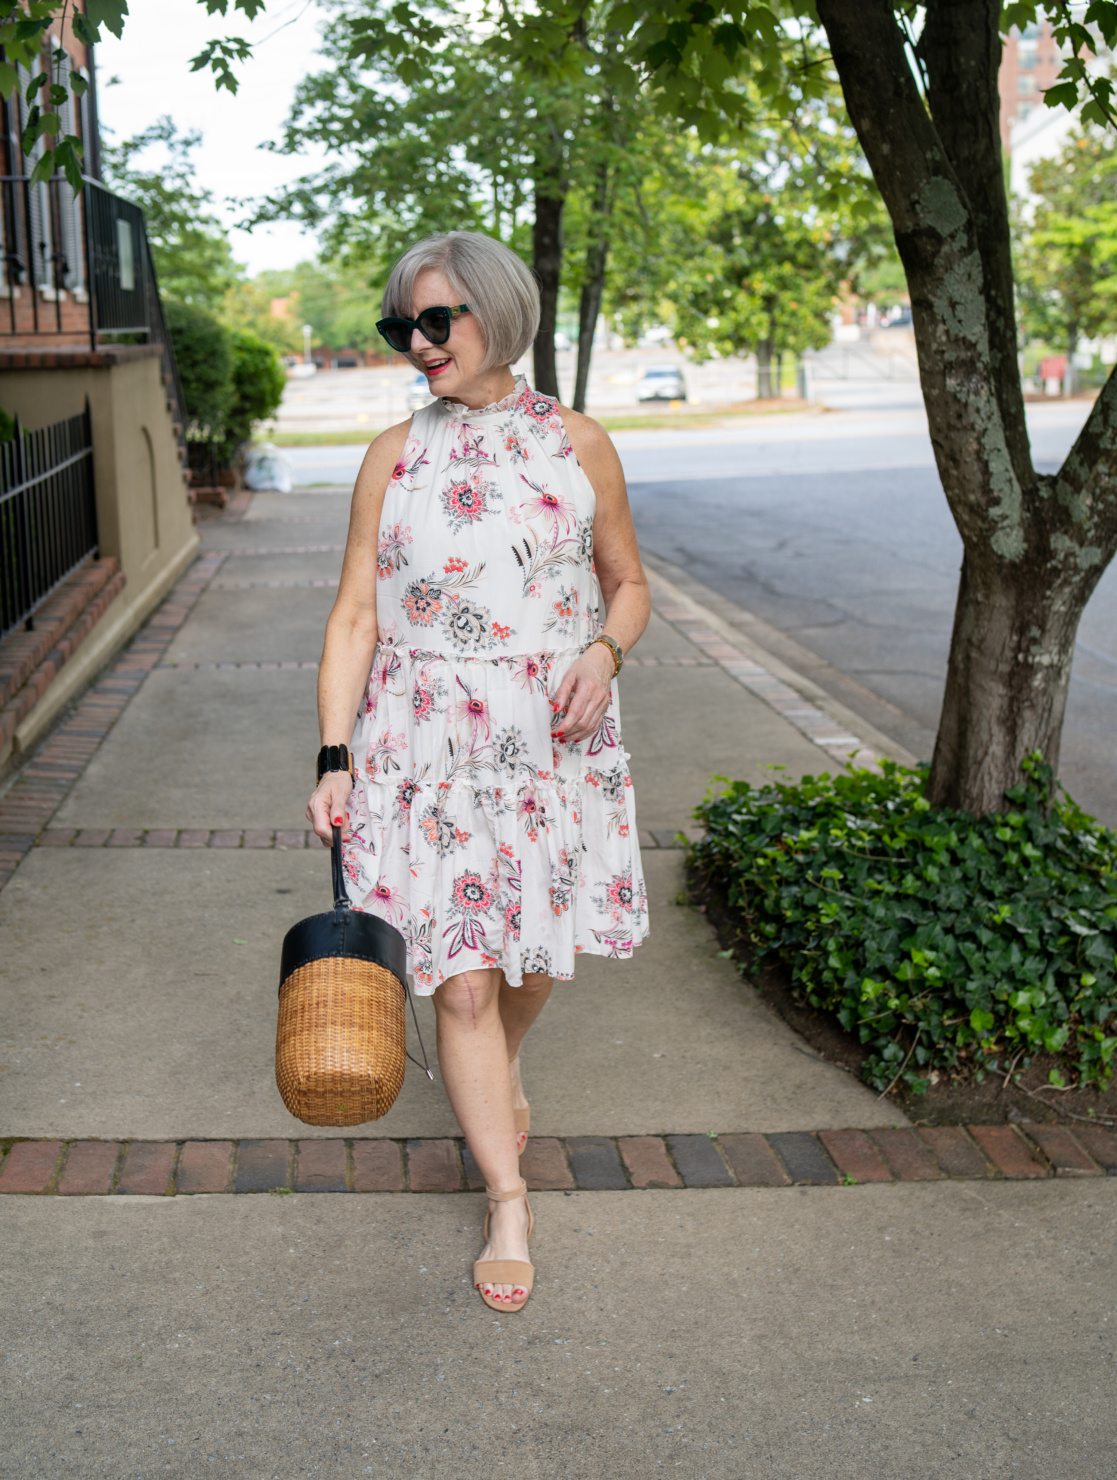 Espadrille Season + Why I Love Dressing in Spring - wit & whimsy